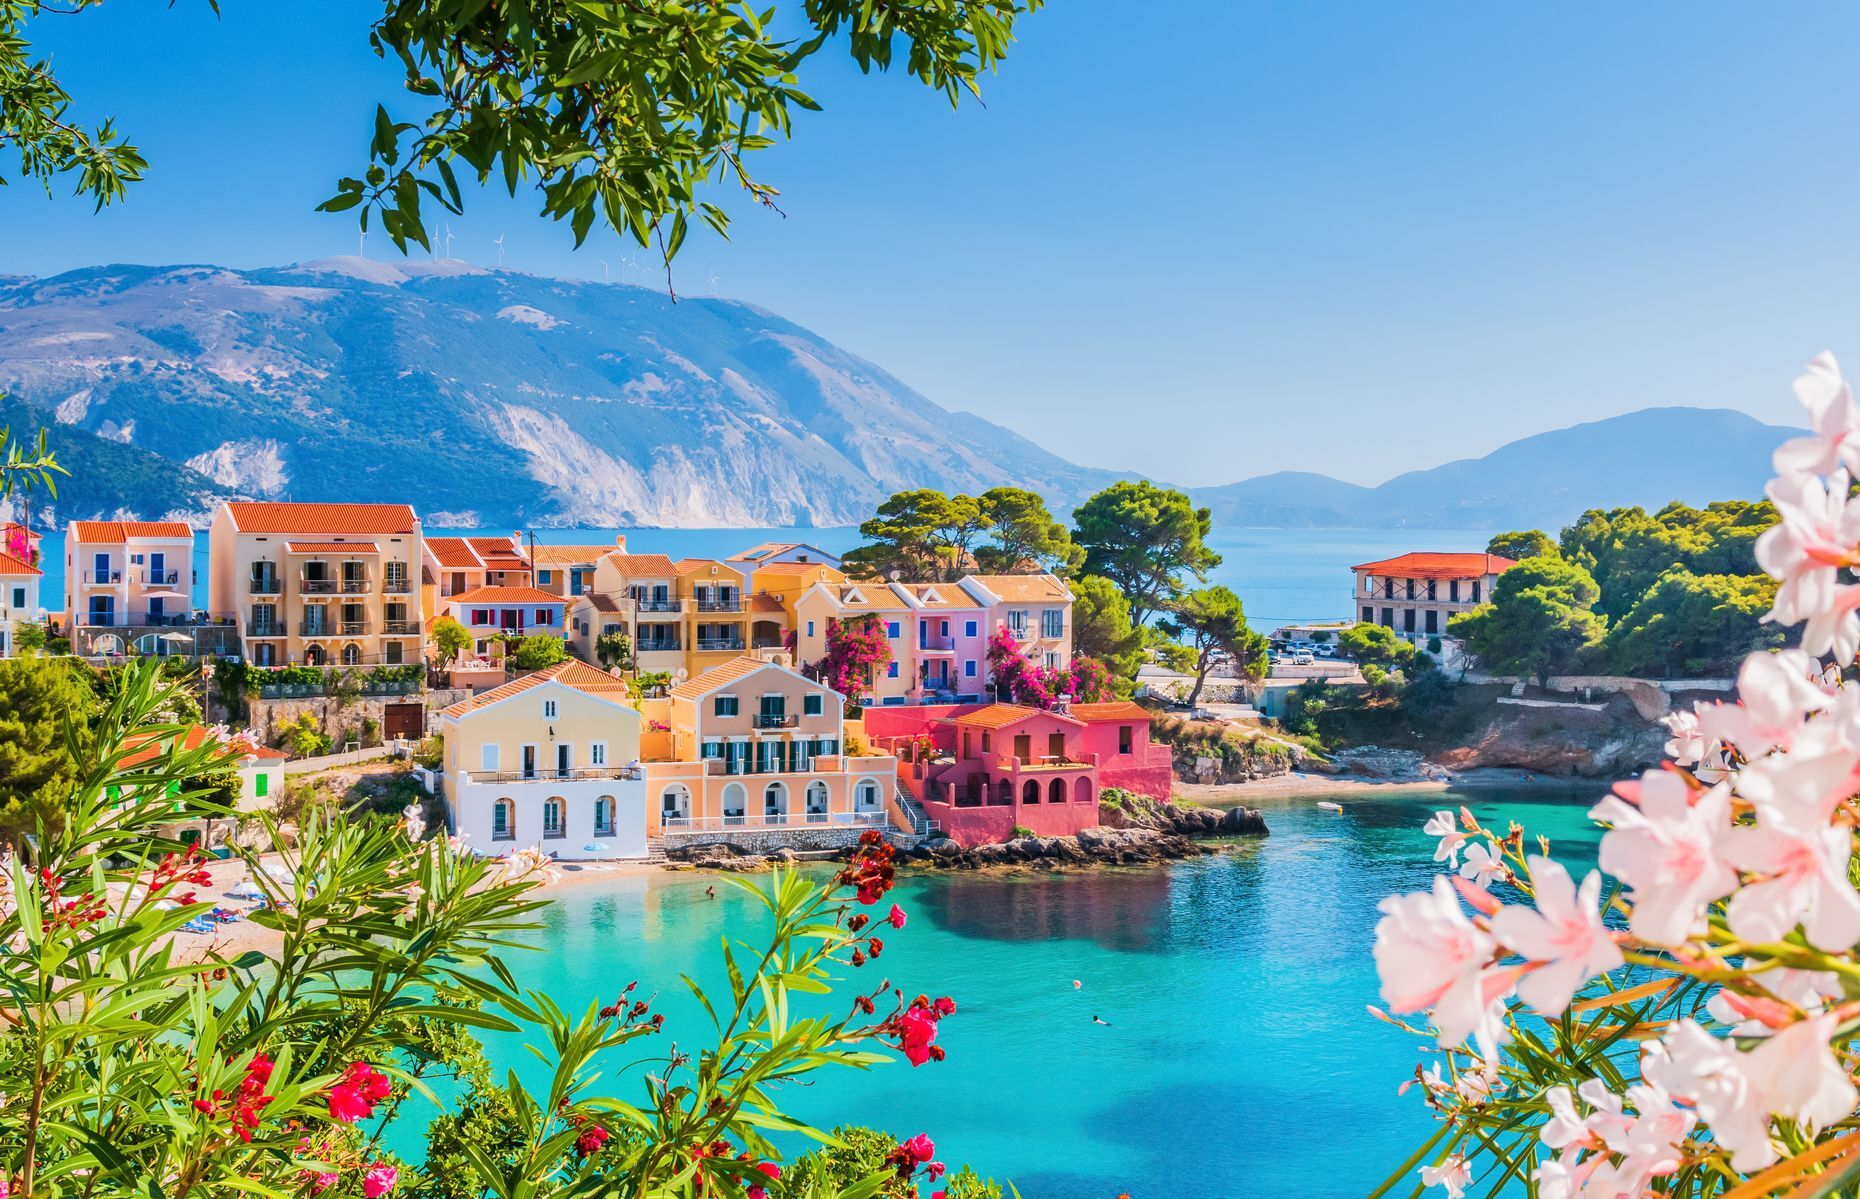 Pearl of the Ionian Islands, <a href="https://www.discovergreece.com/ionian-islands/kefalonia" rel="noreferrer noopener">Kefalonia</a> absolutely deserves a spot on your Greek itinerary. Visit <a href="https://www.discovergreece.com/experiences/wild-beauty-kefalonias-myrtos-beach" rel="noreferrer noopener">Myrtos Beach</a> to enjoy turquoise waters and imposing cliffs, then explore the <a href="https://www.discovergreece.com/experiences/boating-kefalonias-melissani-cave" rel="noreferrer noopener">Melissani</a> and <a href="https://www.greeka.com/ionian/kefalonia/sightseeing/kefalonia-drogarati-cave/" rel="noreferrer noopener">Drogarati</a> caves for fascinating adventures underground. Located off the country’s west coast, Kefalonia is home to many other treasures as well. Tour the villages of <a href="https://www.greeka.com/ionian/kefalonia/villages/assos/" rel="noreferrer noopener">Assos</a> and <a href="https://www.greeka.com/ionian/kefalonia/villages/fiscardo/" rel="noreferrer noopener">Fiskardo</a>, admire Mount <a href="https://www.discovergreece.com/experiences/hiking-in-kefalonia" rel="noreferrer noopener">Ainos</a>, and have a blast on numerous attractive <a href="https://www.thethinkingtraveller.com/greece/kefalonia/beaches" rel="noreferrer noopener">beaches</a>.